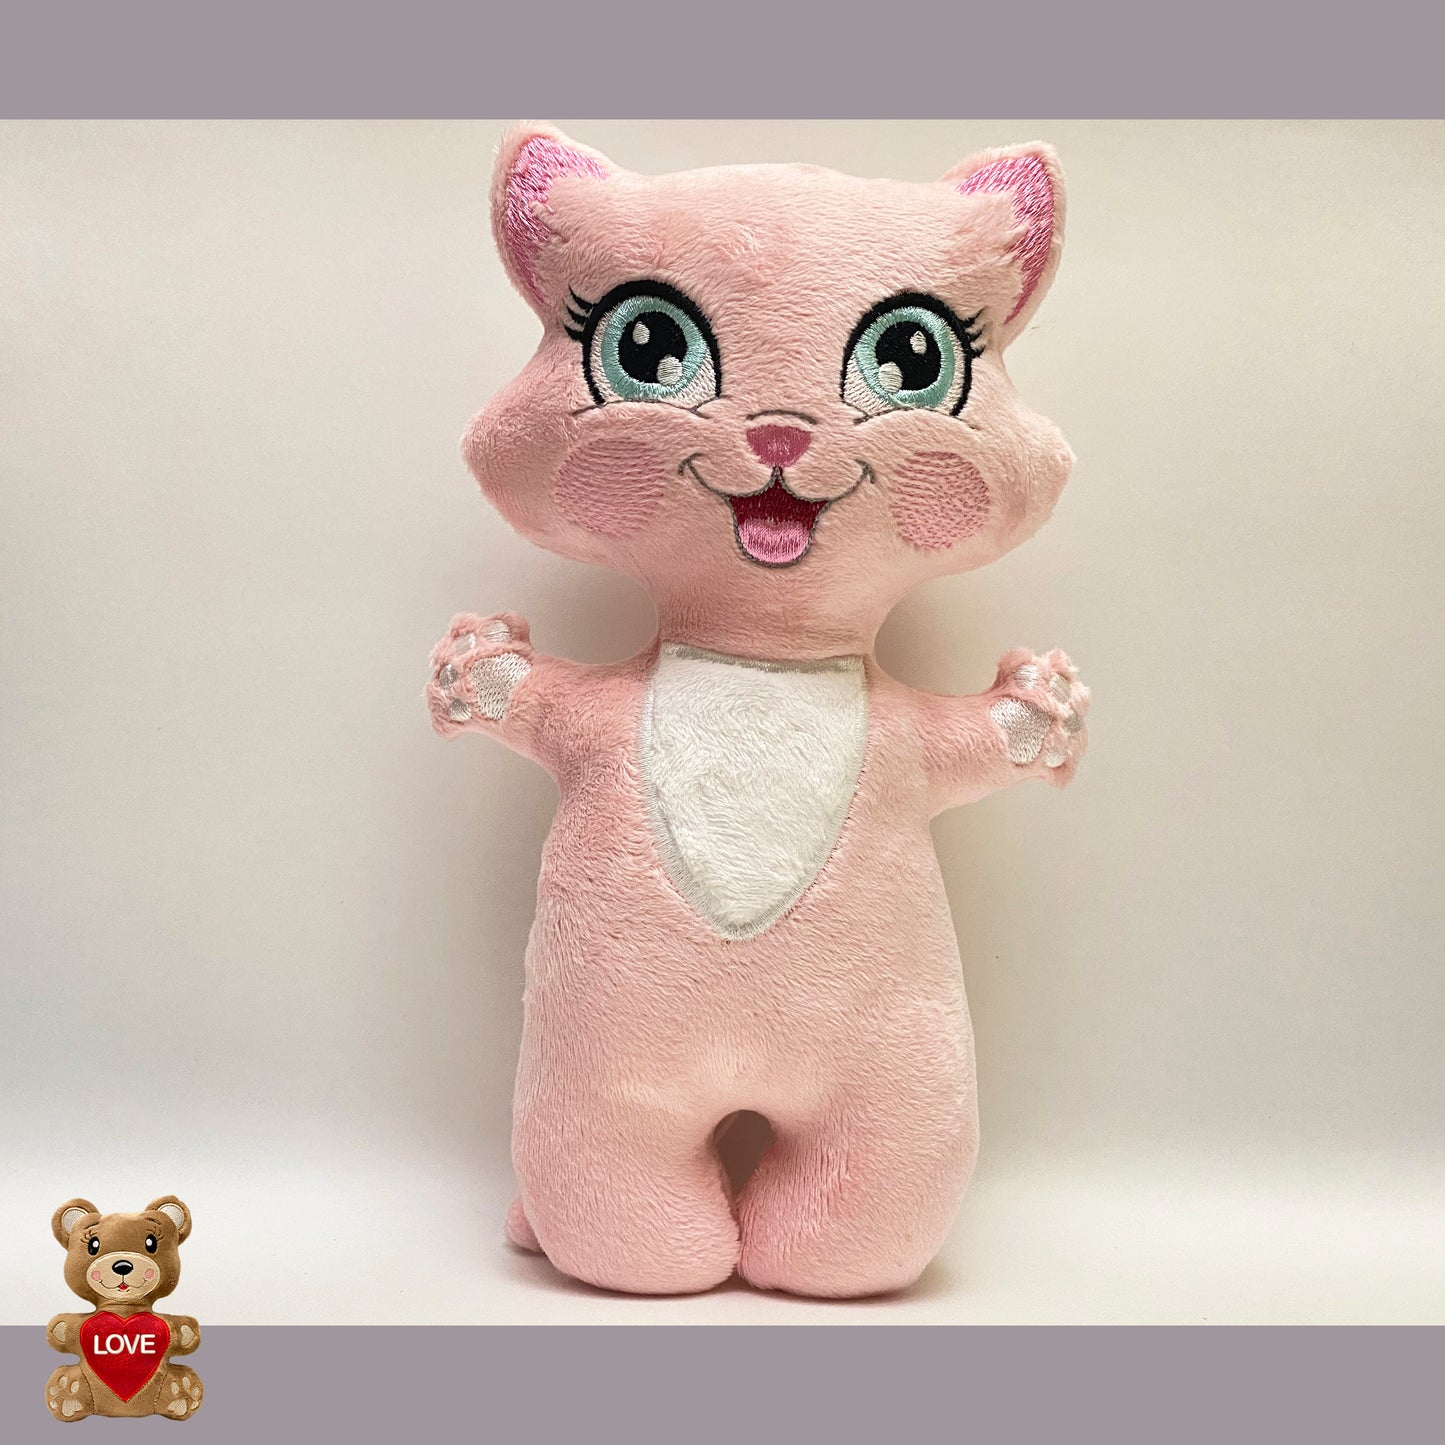 Personalised Cute Cat Stuffed toy ,Super cute personalised soft plush toy, Personalised Gift, Unique Personalized Birthday Gifts , Custom Gifts For Children